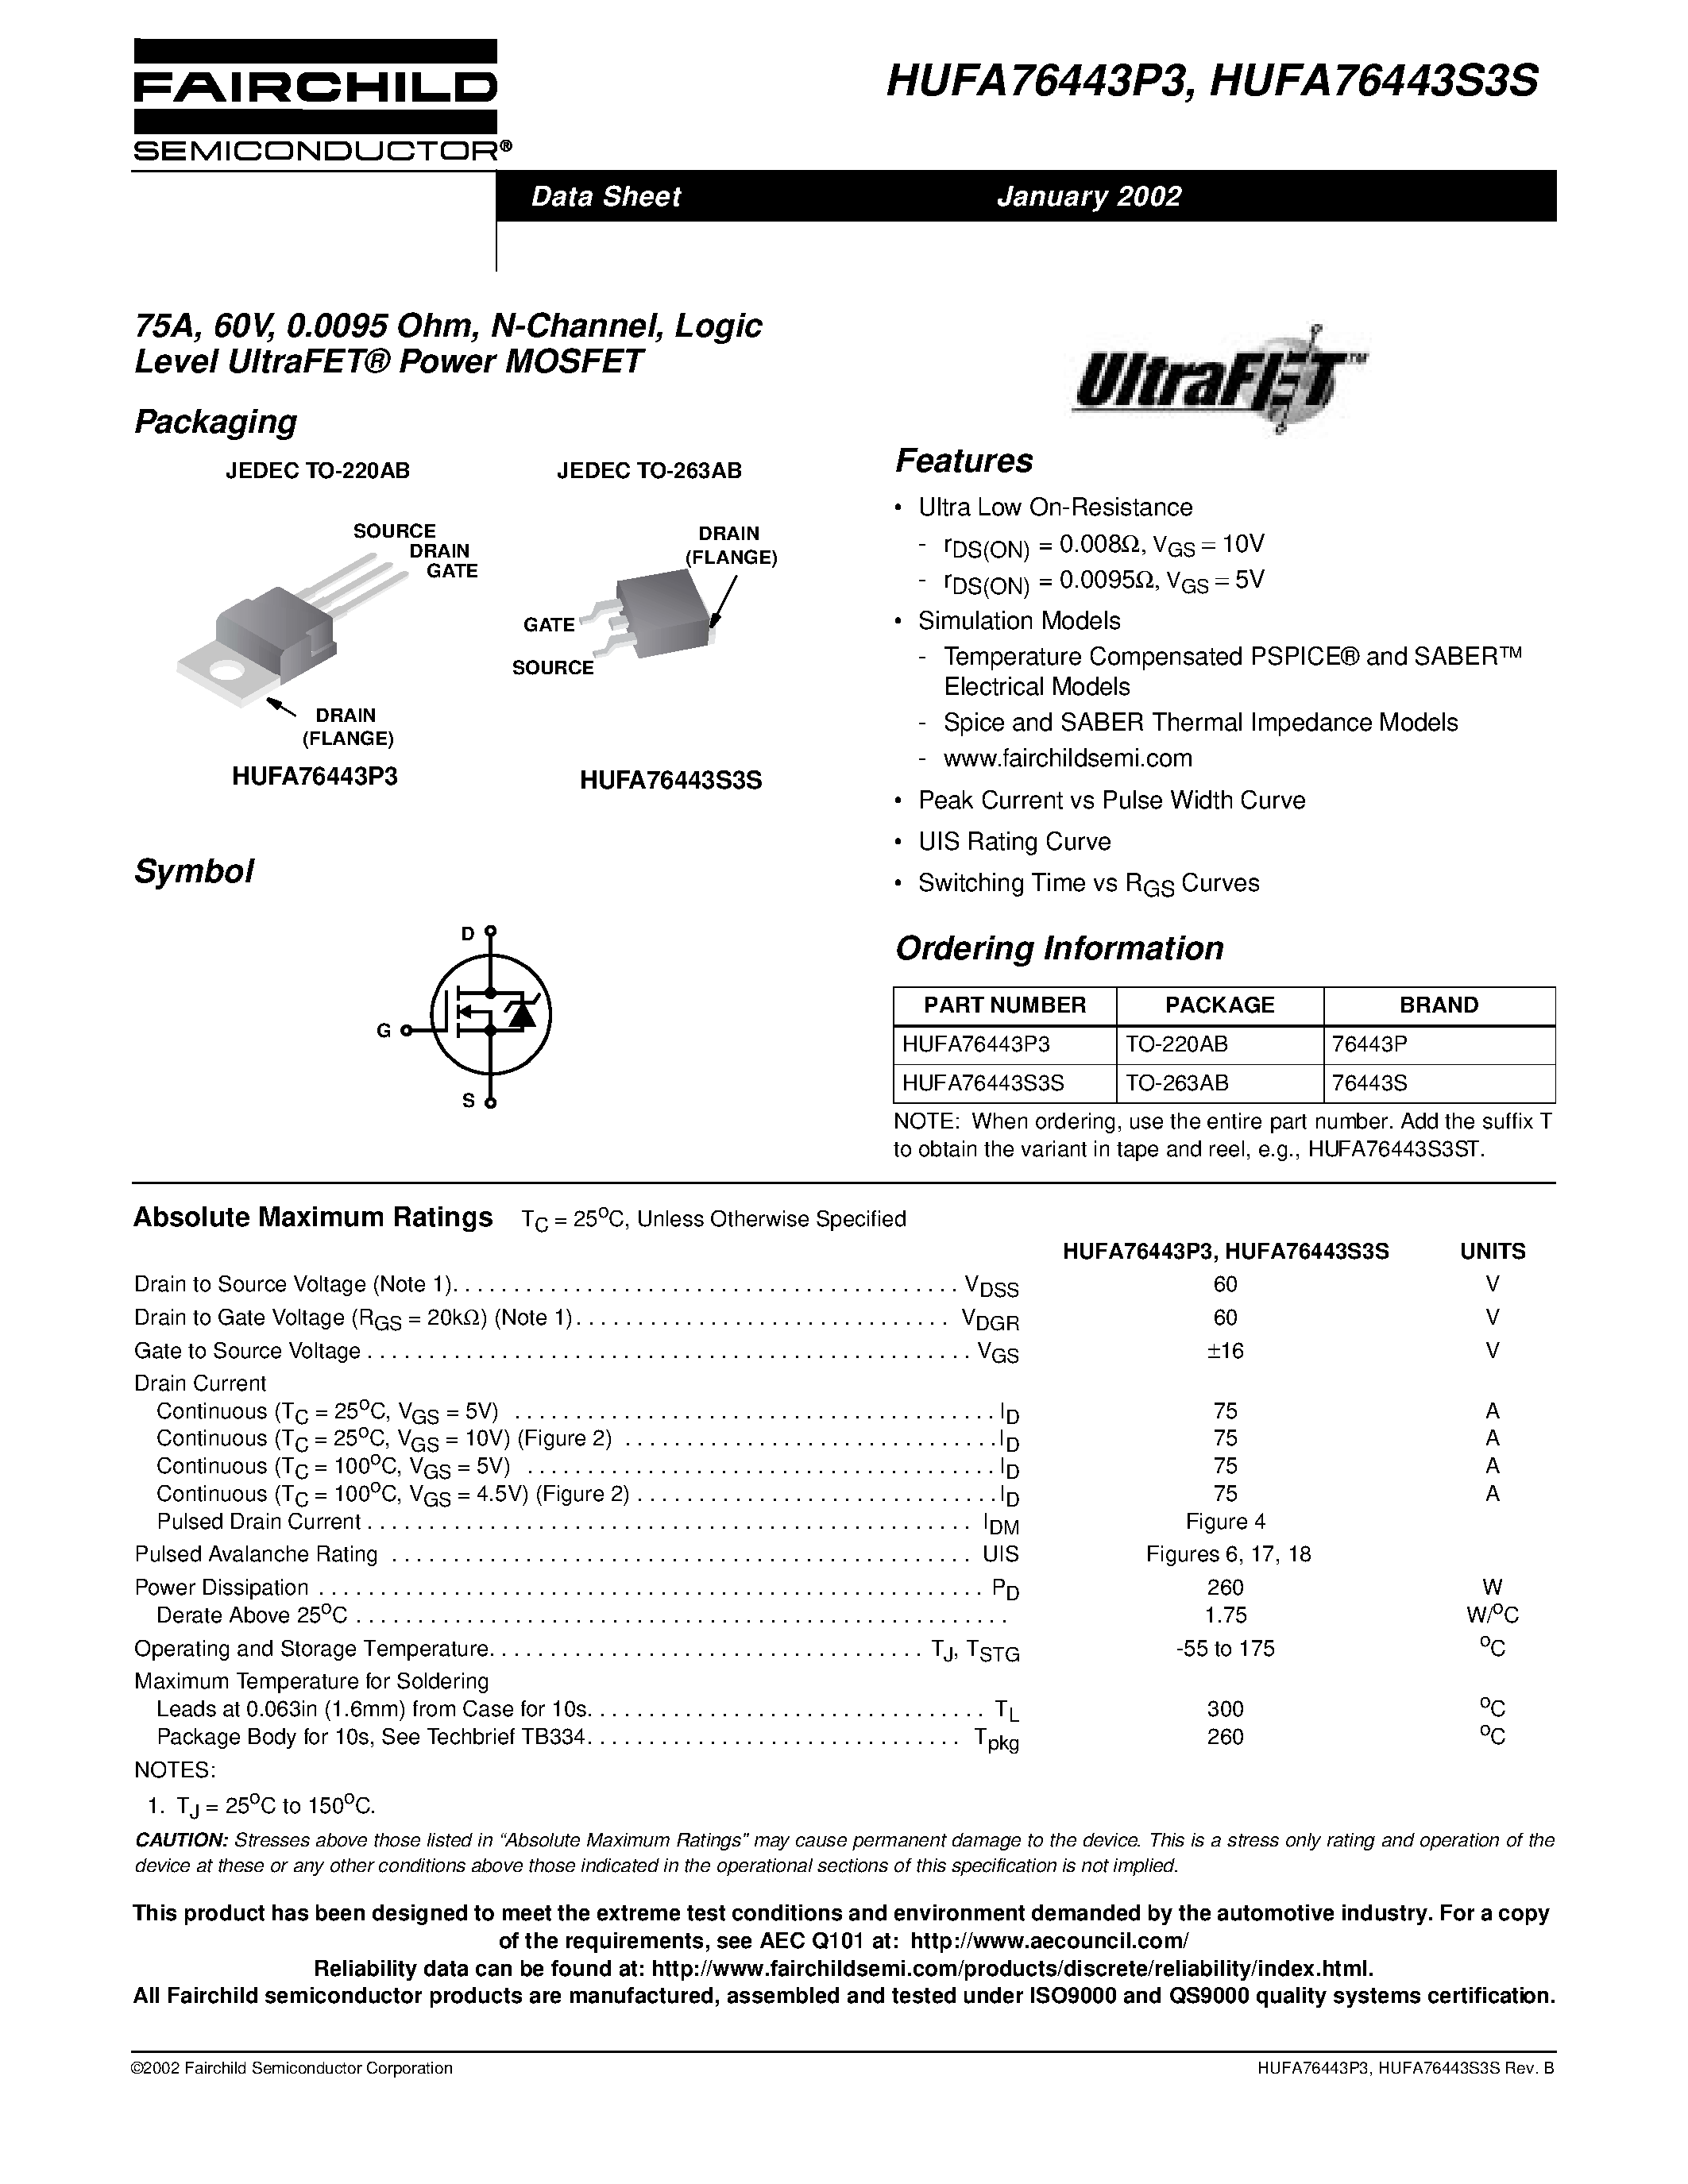 Datasheet HUFA76443P3 - 75A/ 60V/ 0.0095 Ohm/ N-Channel/ Logic Level UltraFET Power MOSFET page 1